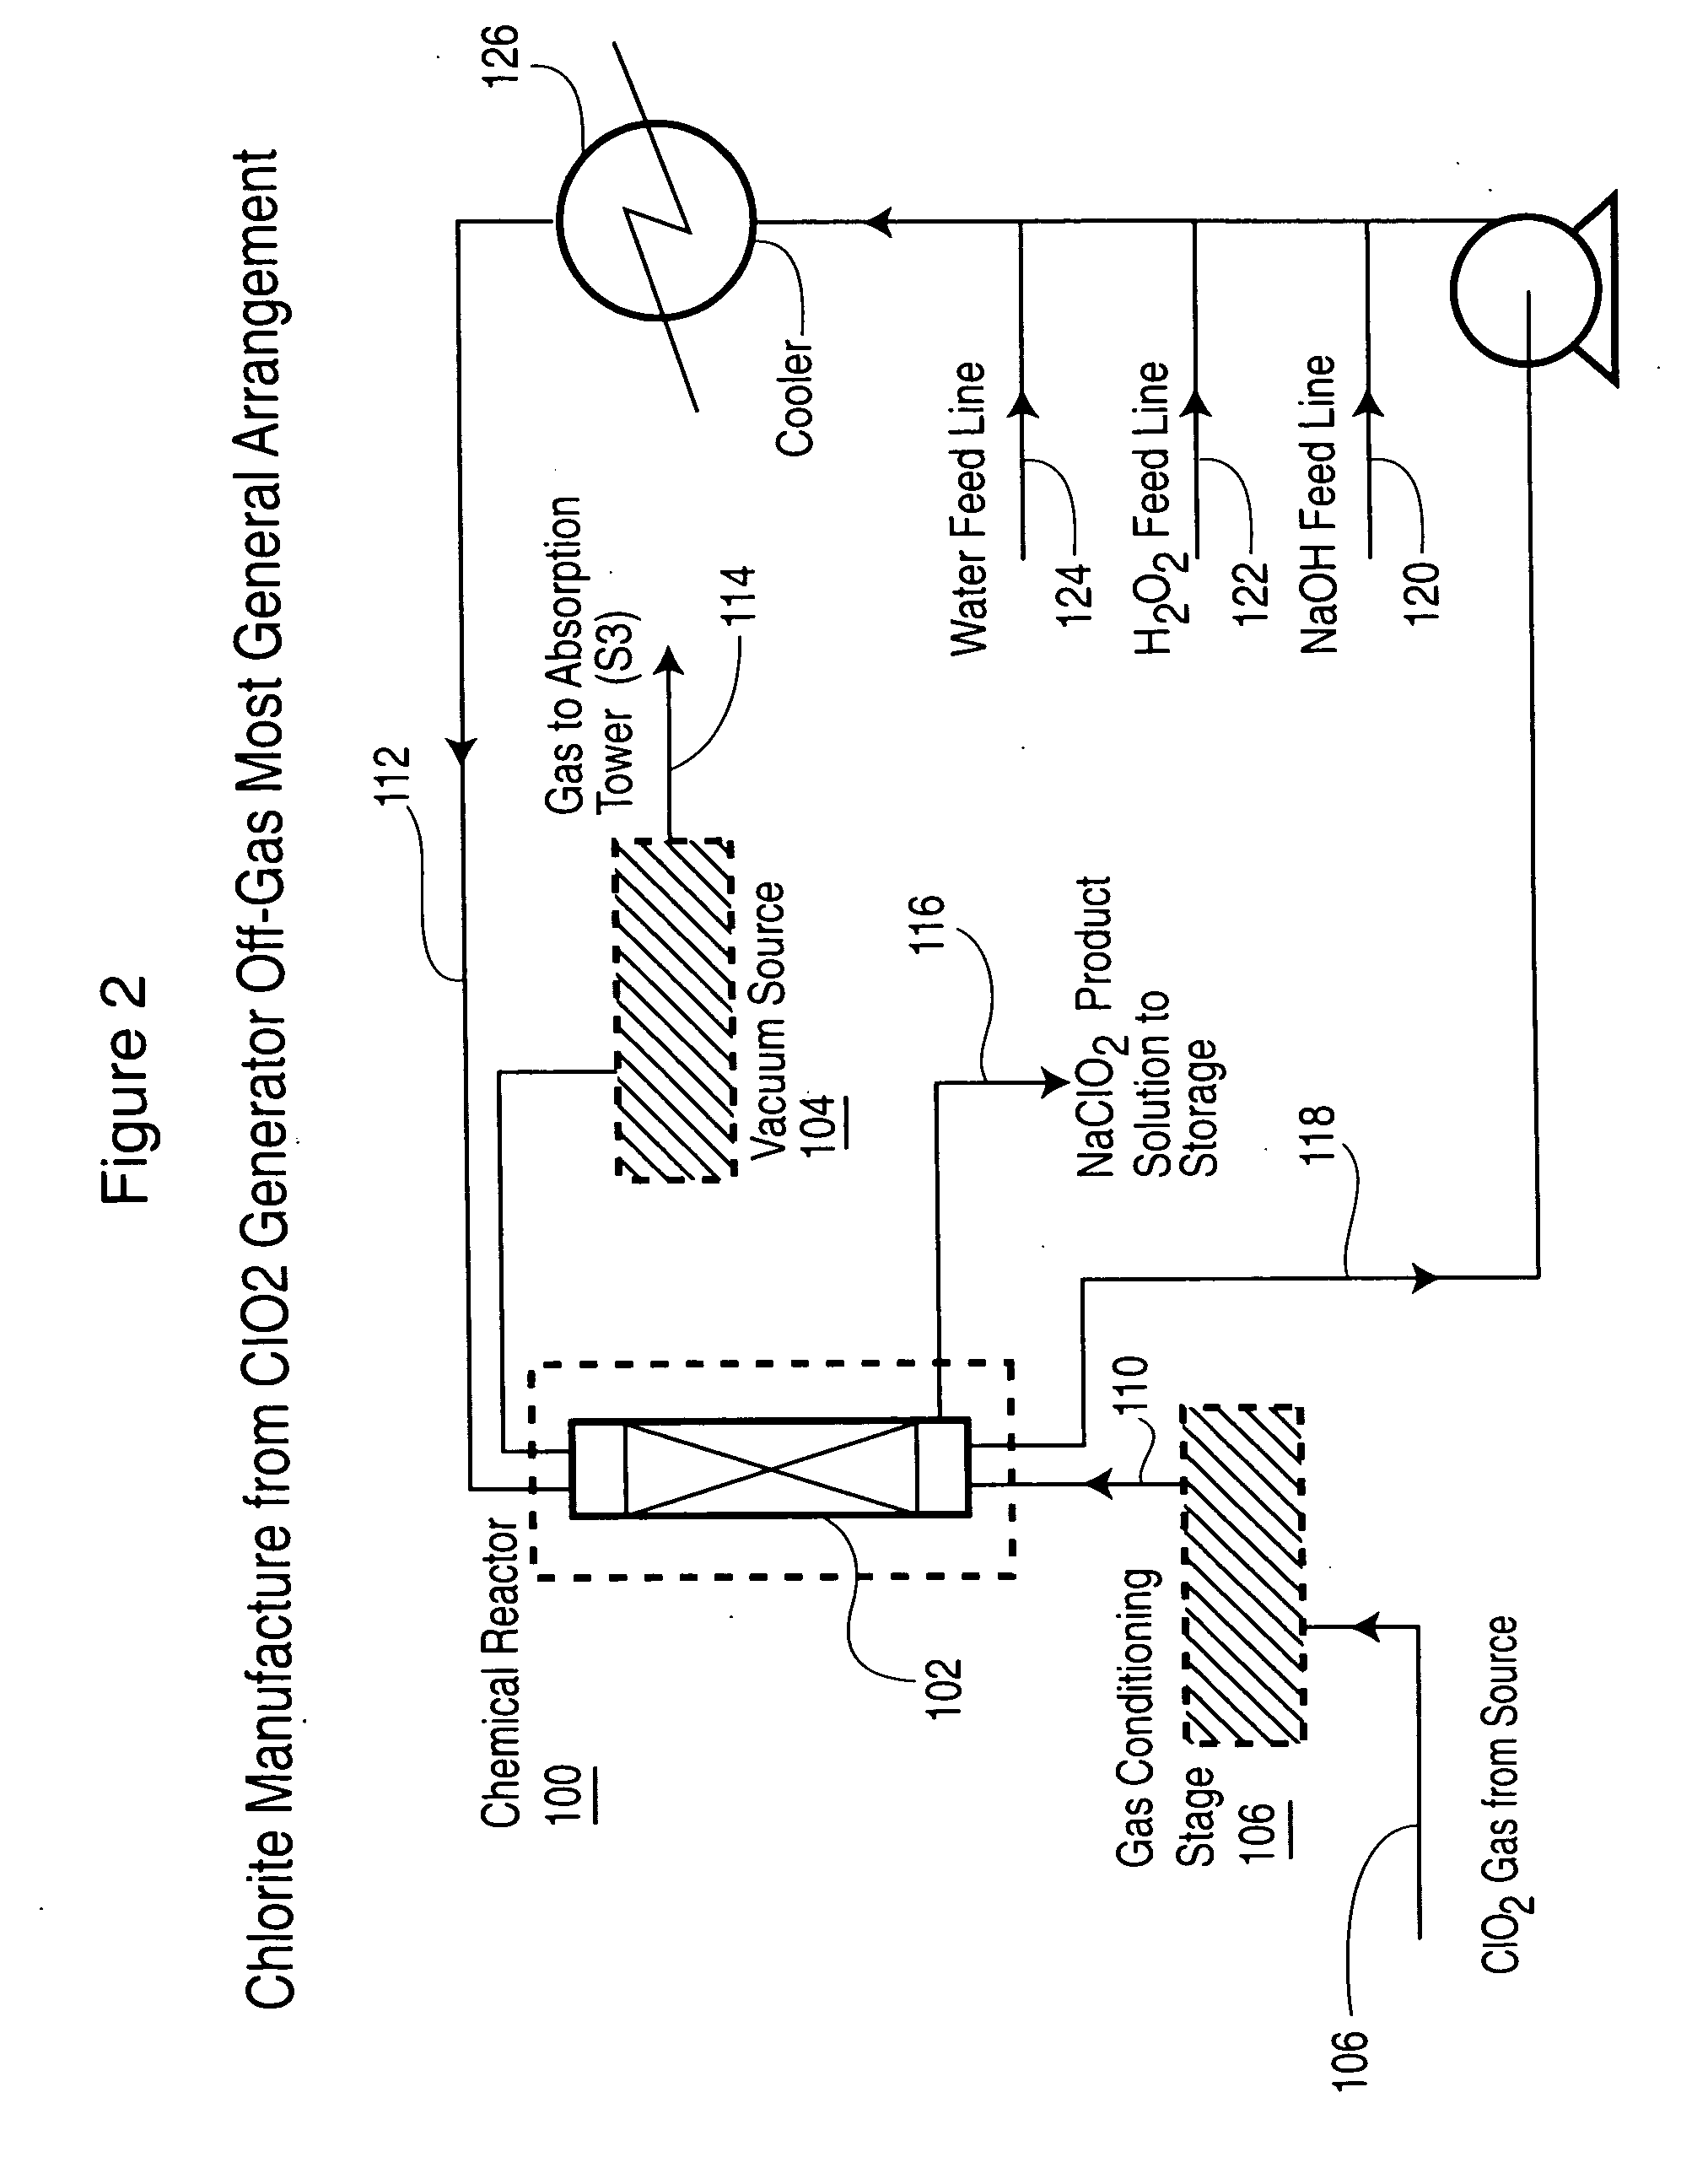 Chlorine dioxide from a methanol-based generating system as a chemical feed in alkali metal chlorite manufacture